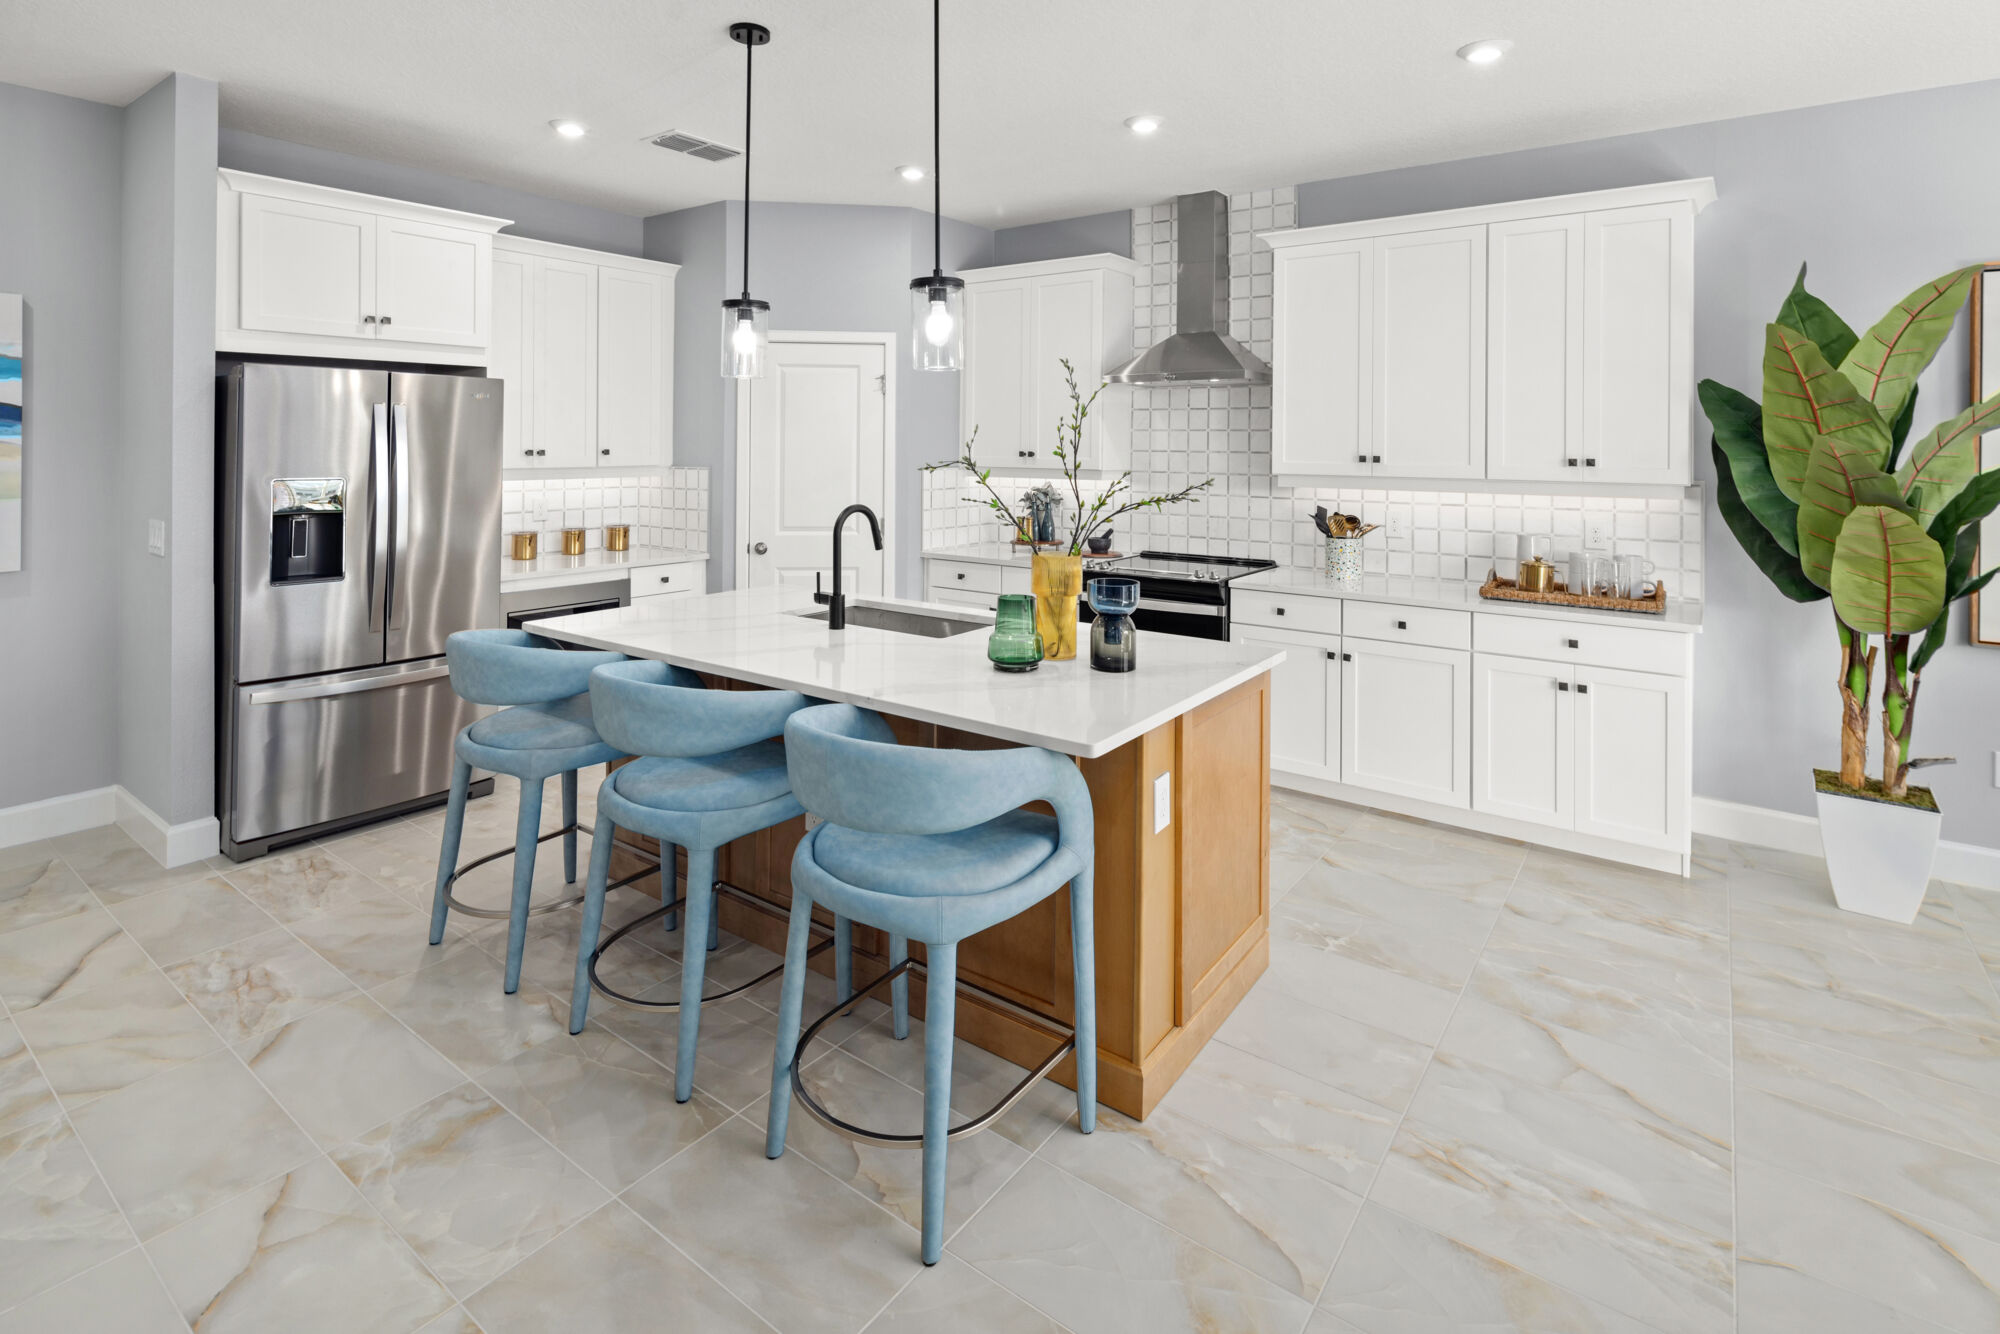 L-Shaped Kitchen with refrigerator, pendant light, door, range, white cabinets and tile flooring